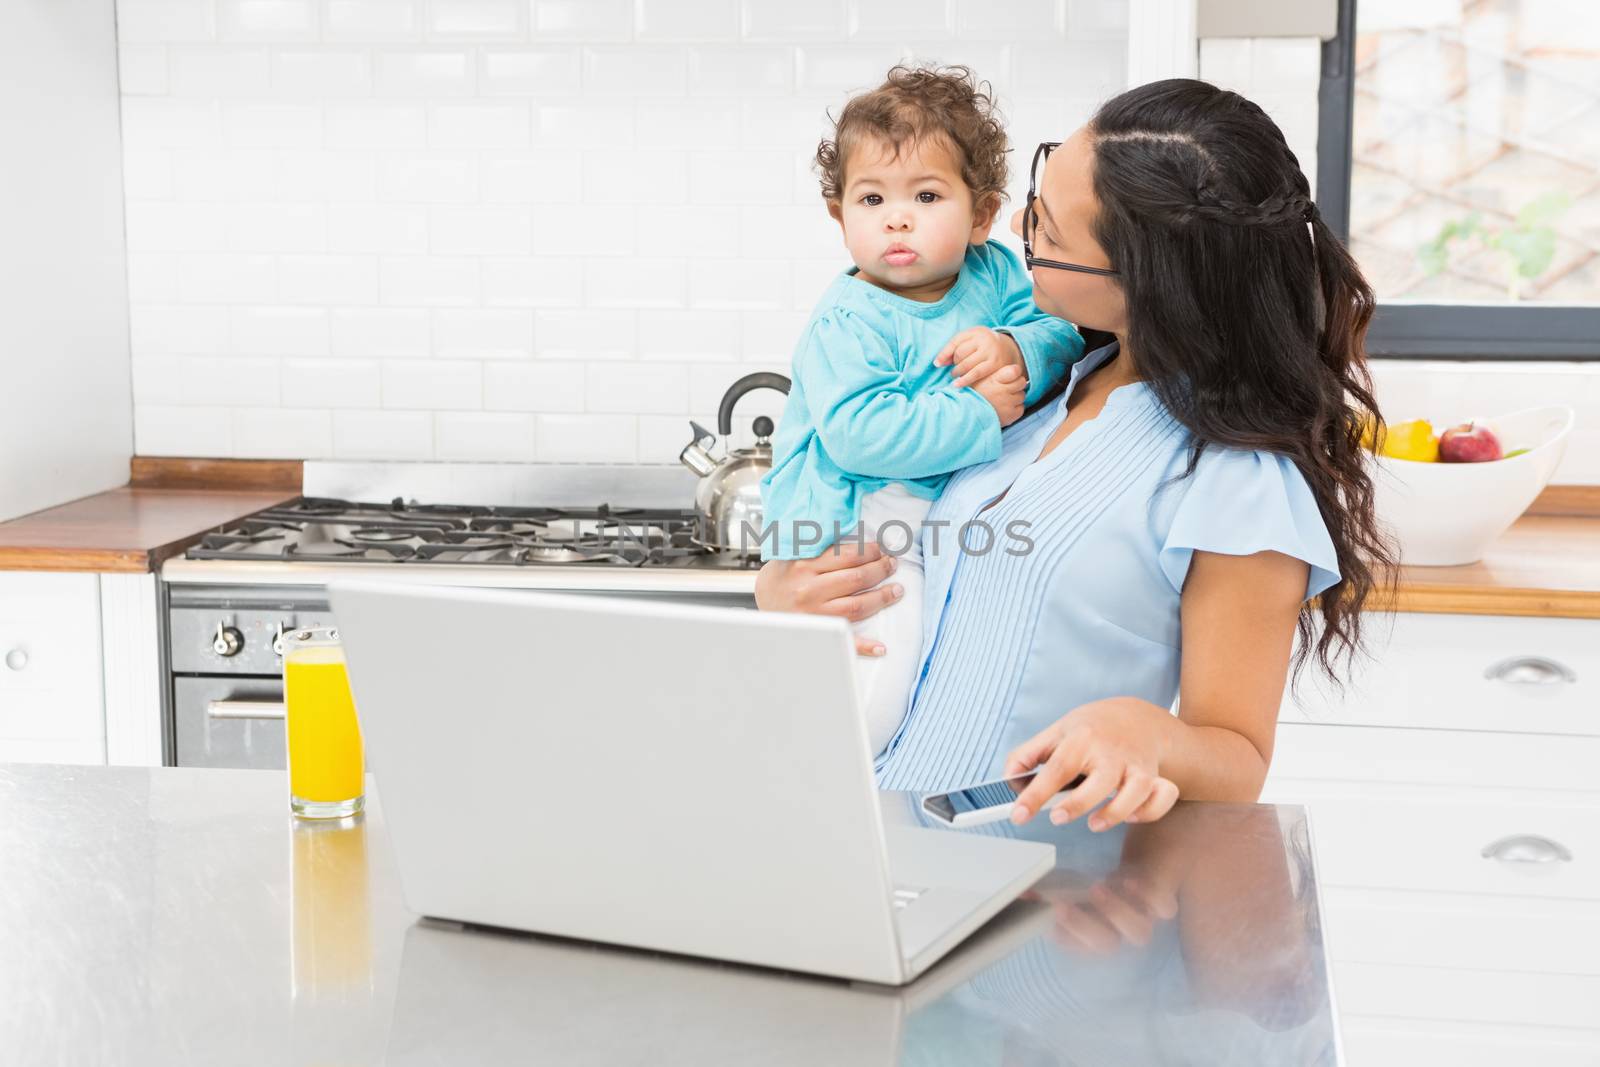 Smiling brunette holding her baby in the kitchen